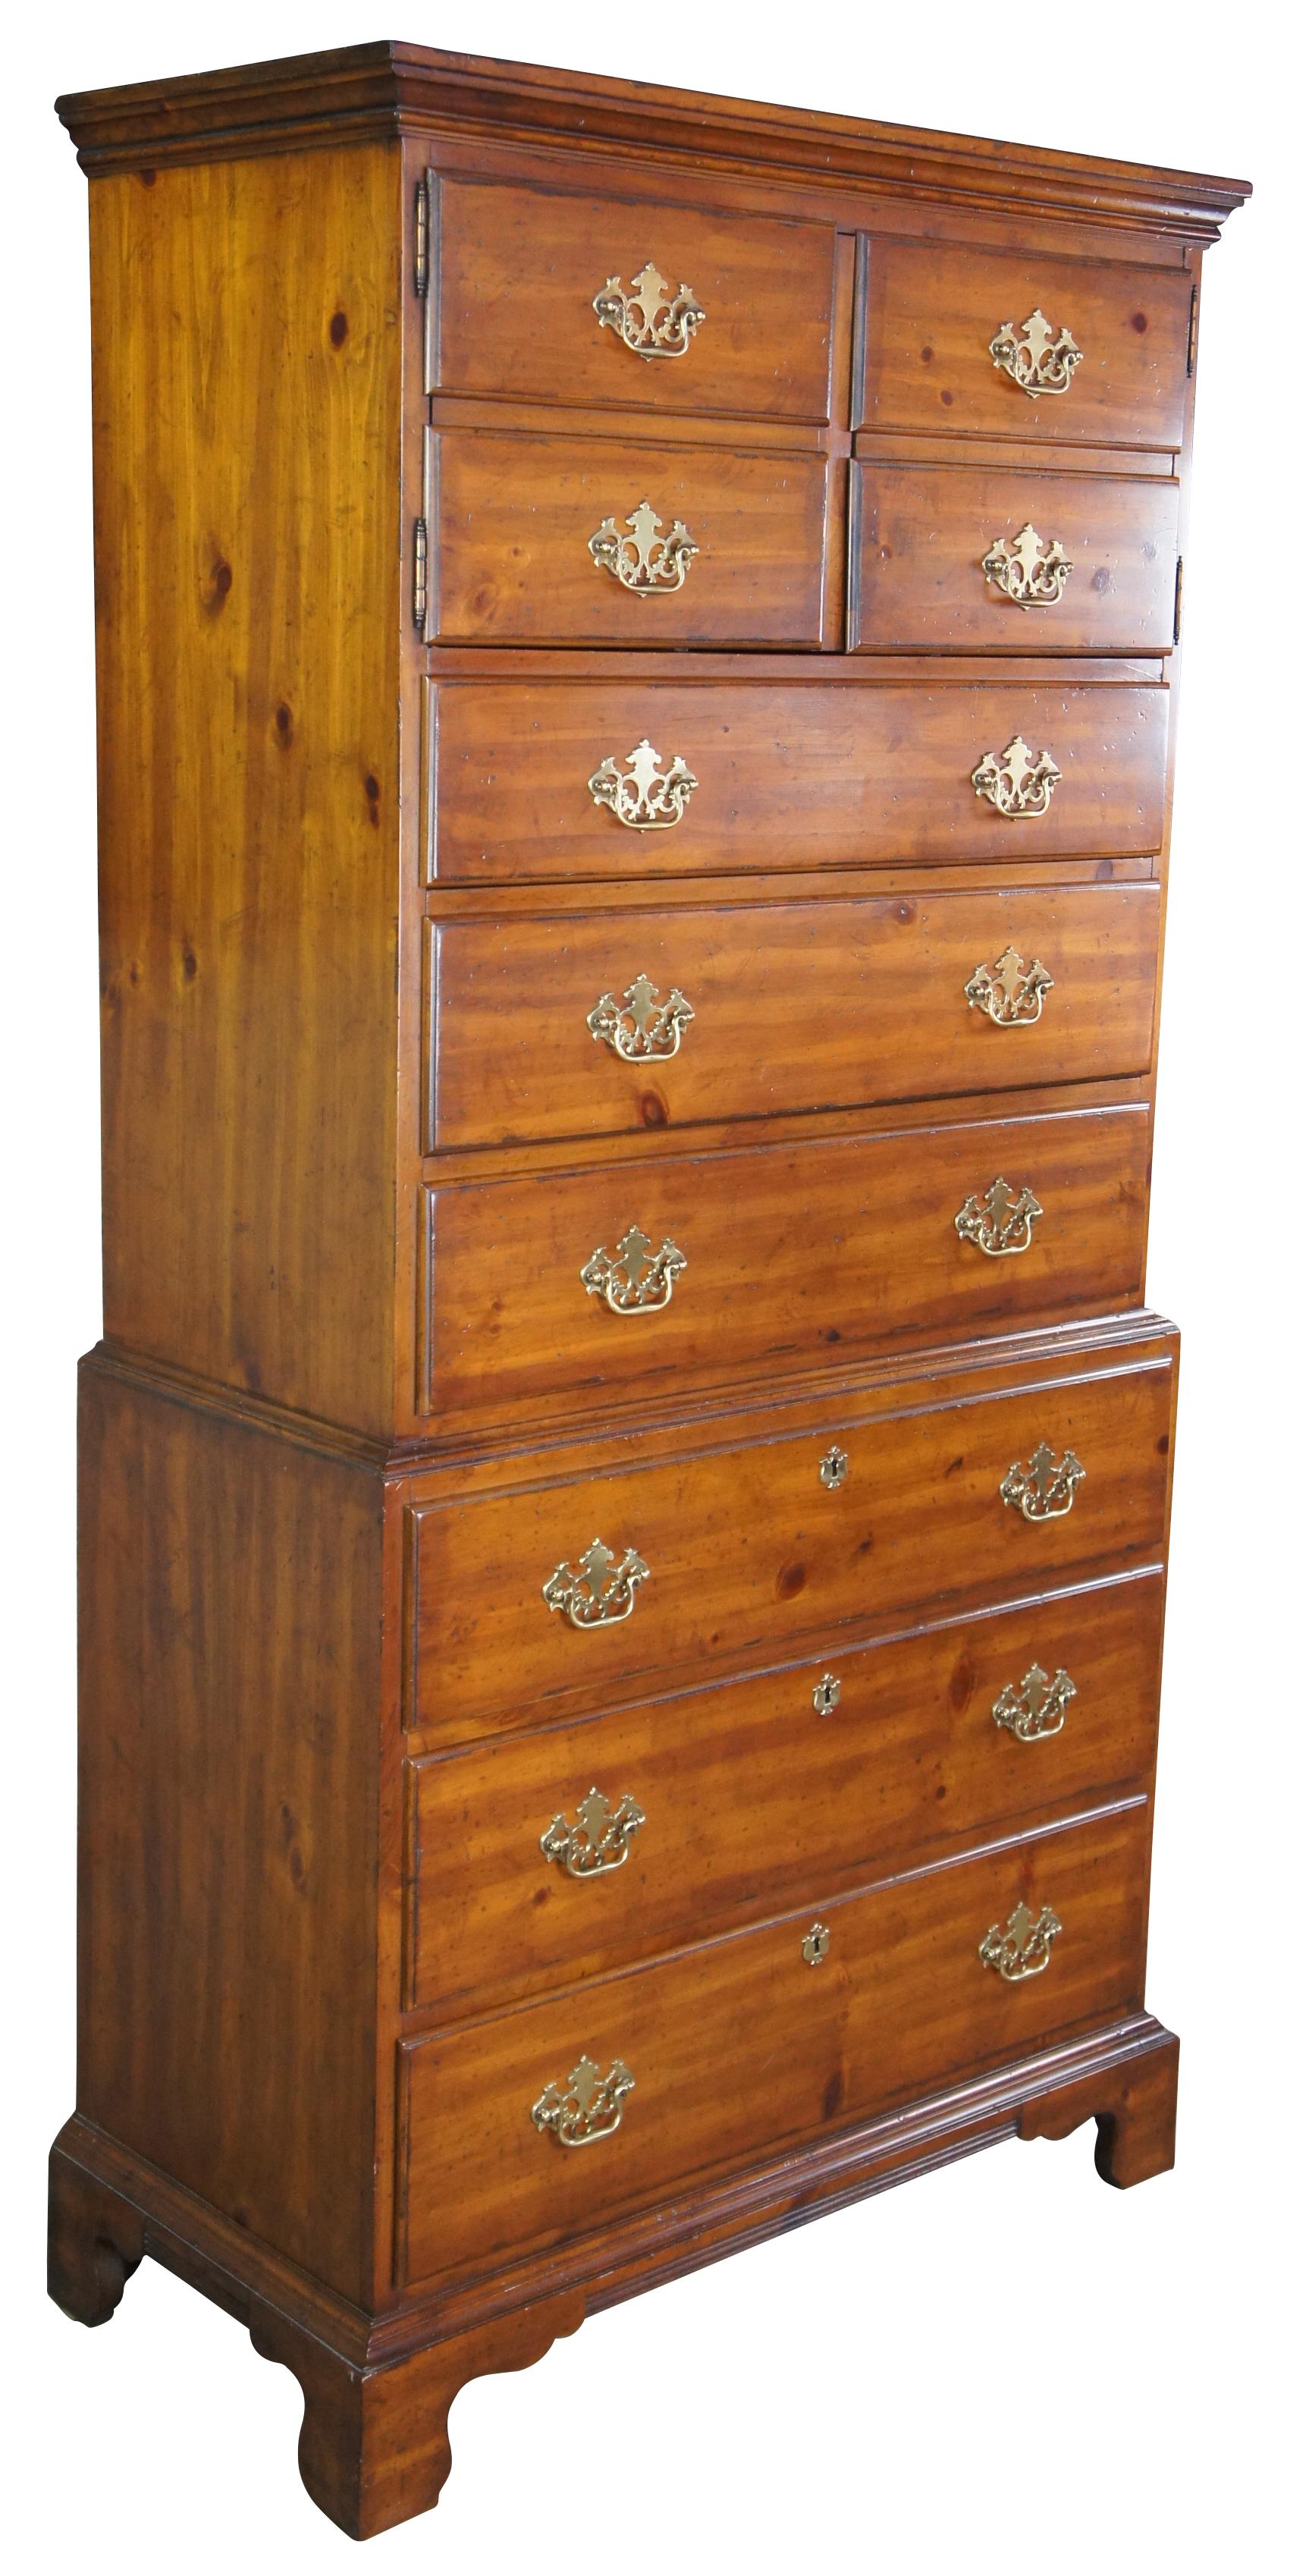 Drexel Heritage American Tour highboy dresser, circa 1960s. Made of pine featuring chest on chest design with six drawers and upper cabinet with three divided cubbies. Brass Colonial hardware and bracket feet. 170-430, American Tour I, Heritage,